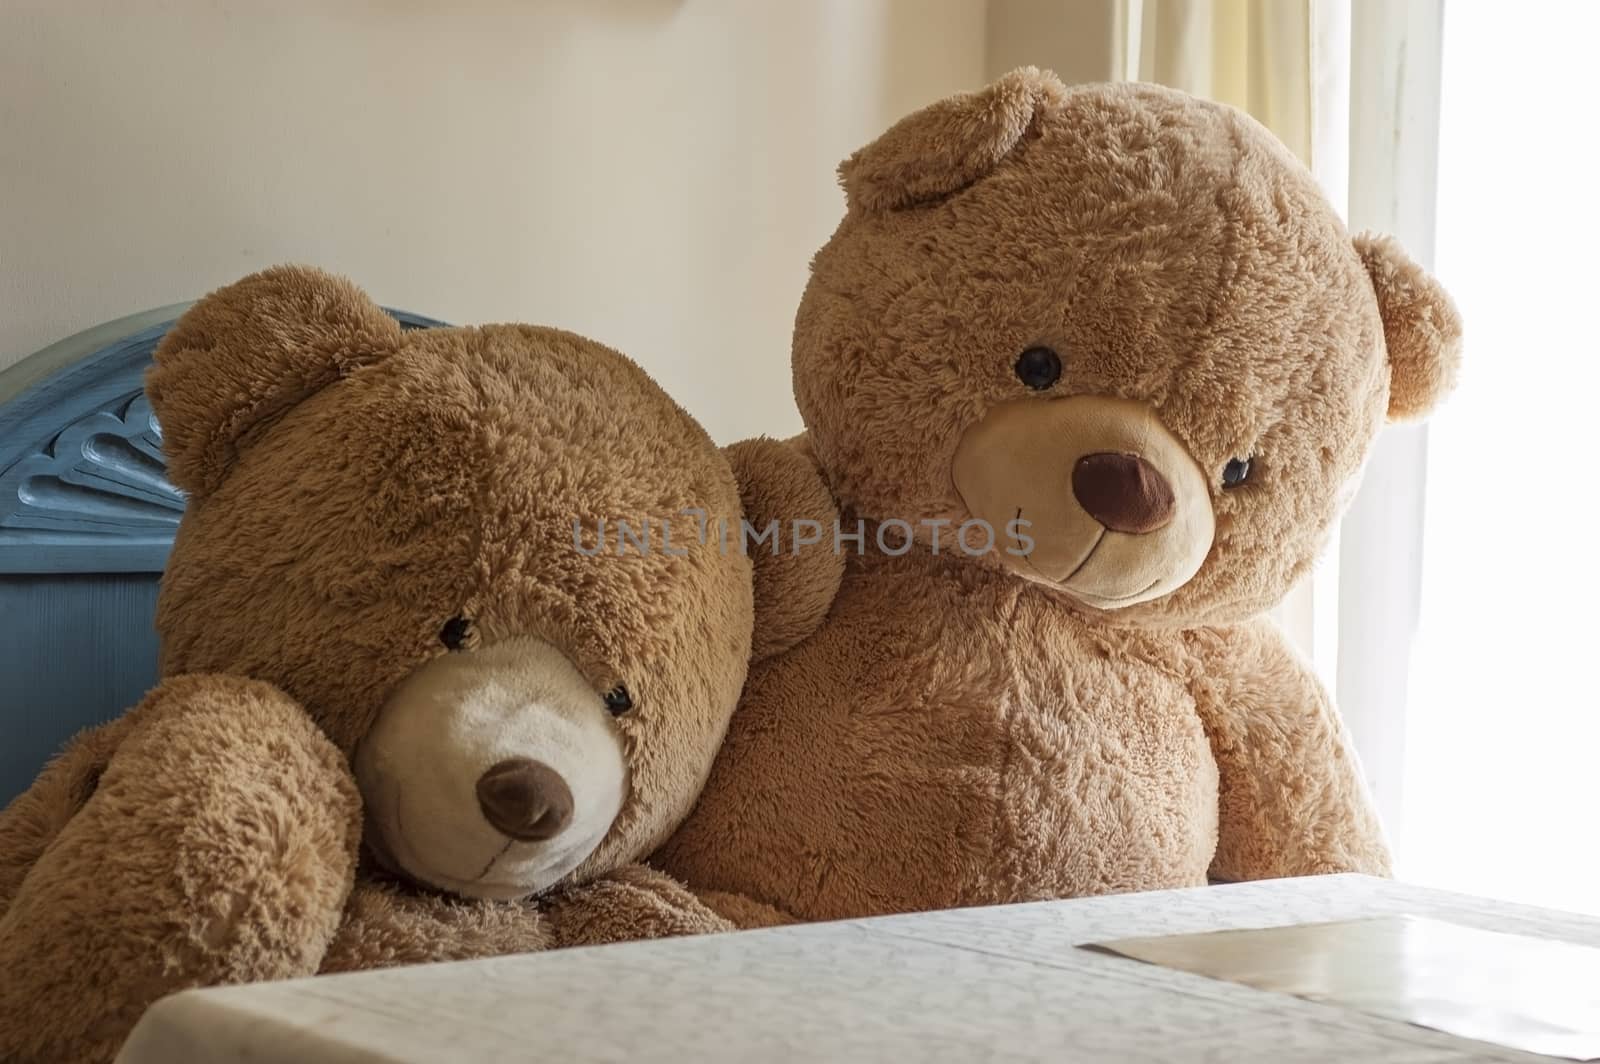 two teddy bears by the table